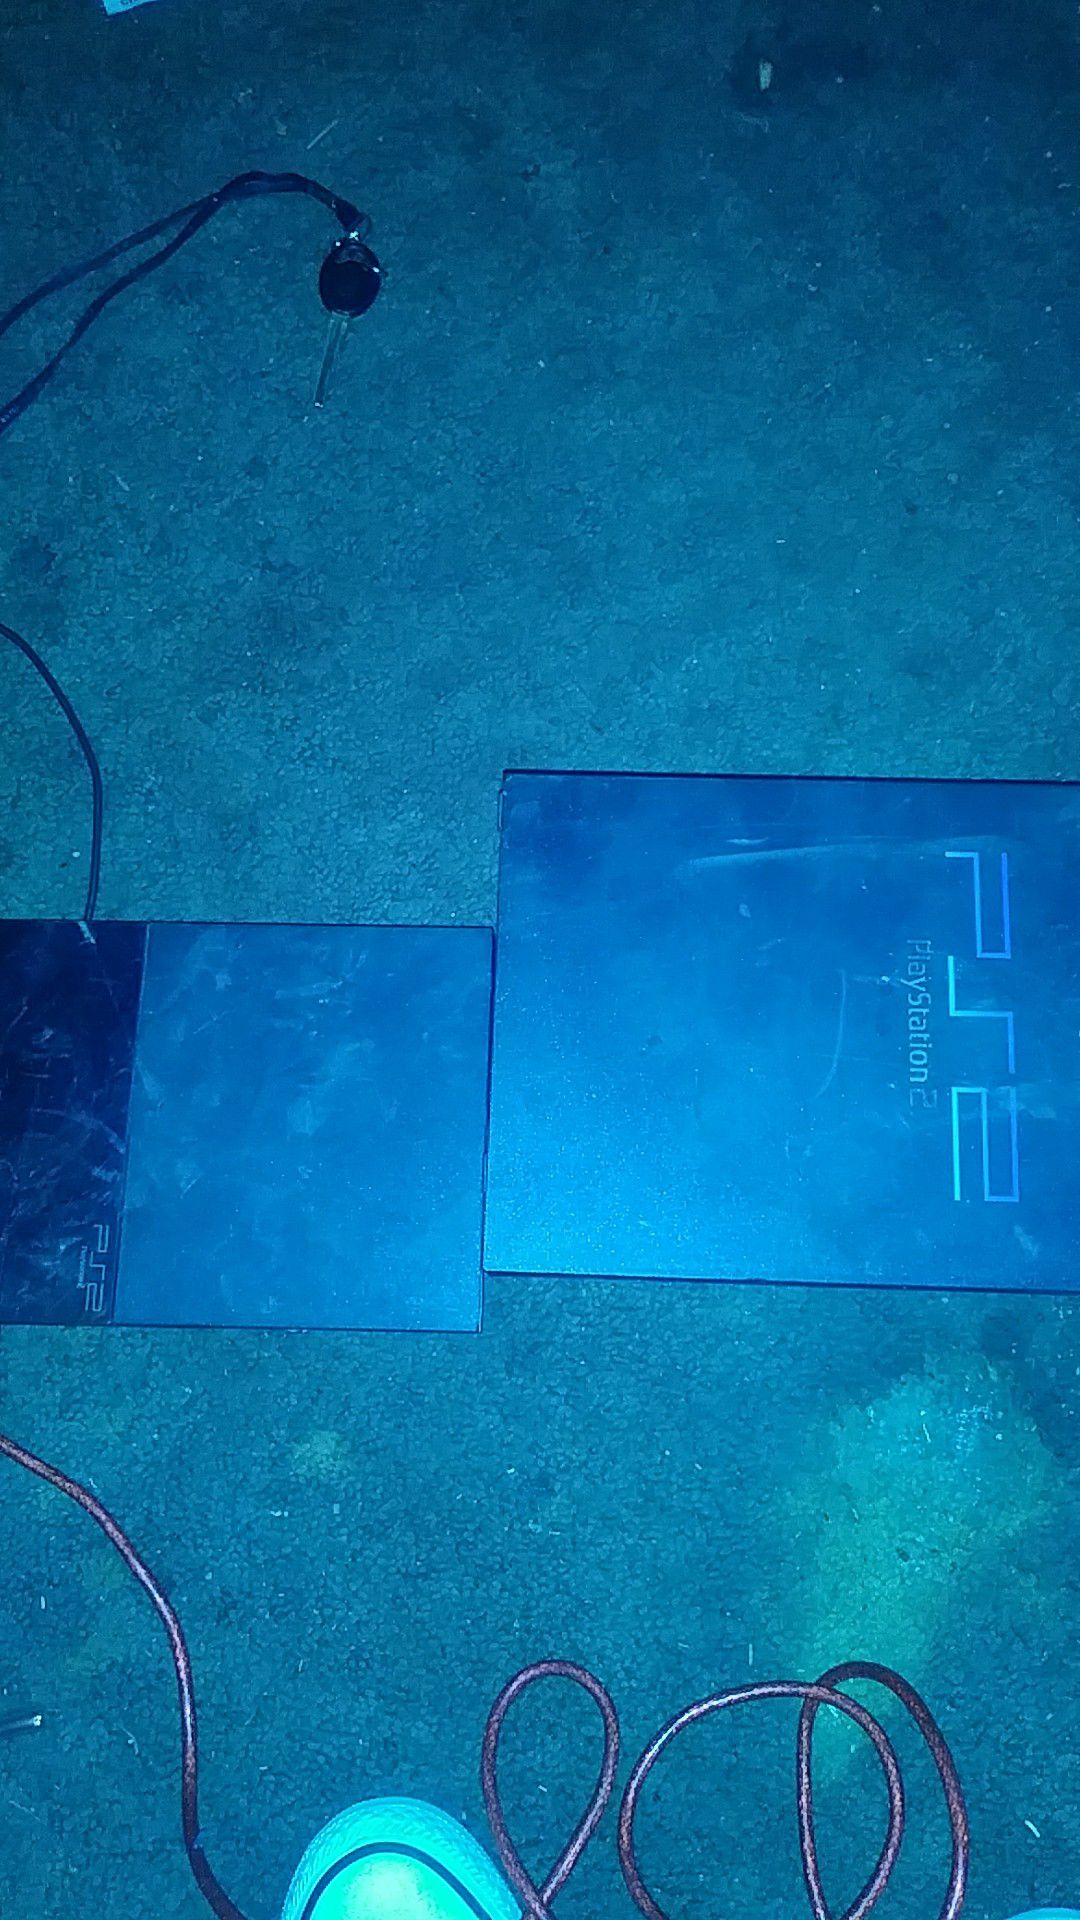 Ps2 slim and the first gen